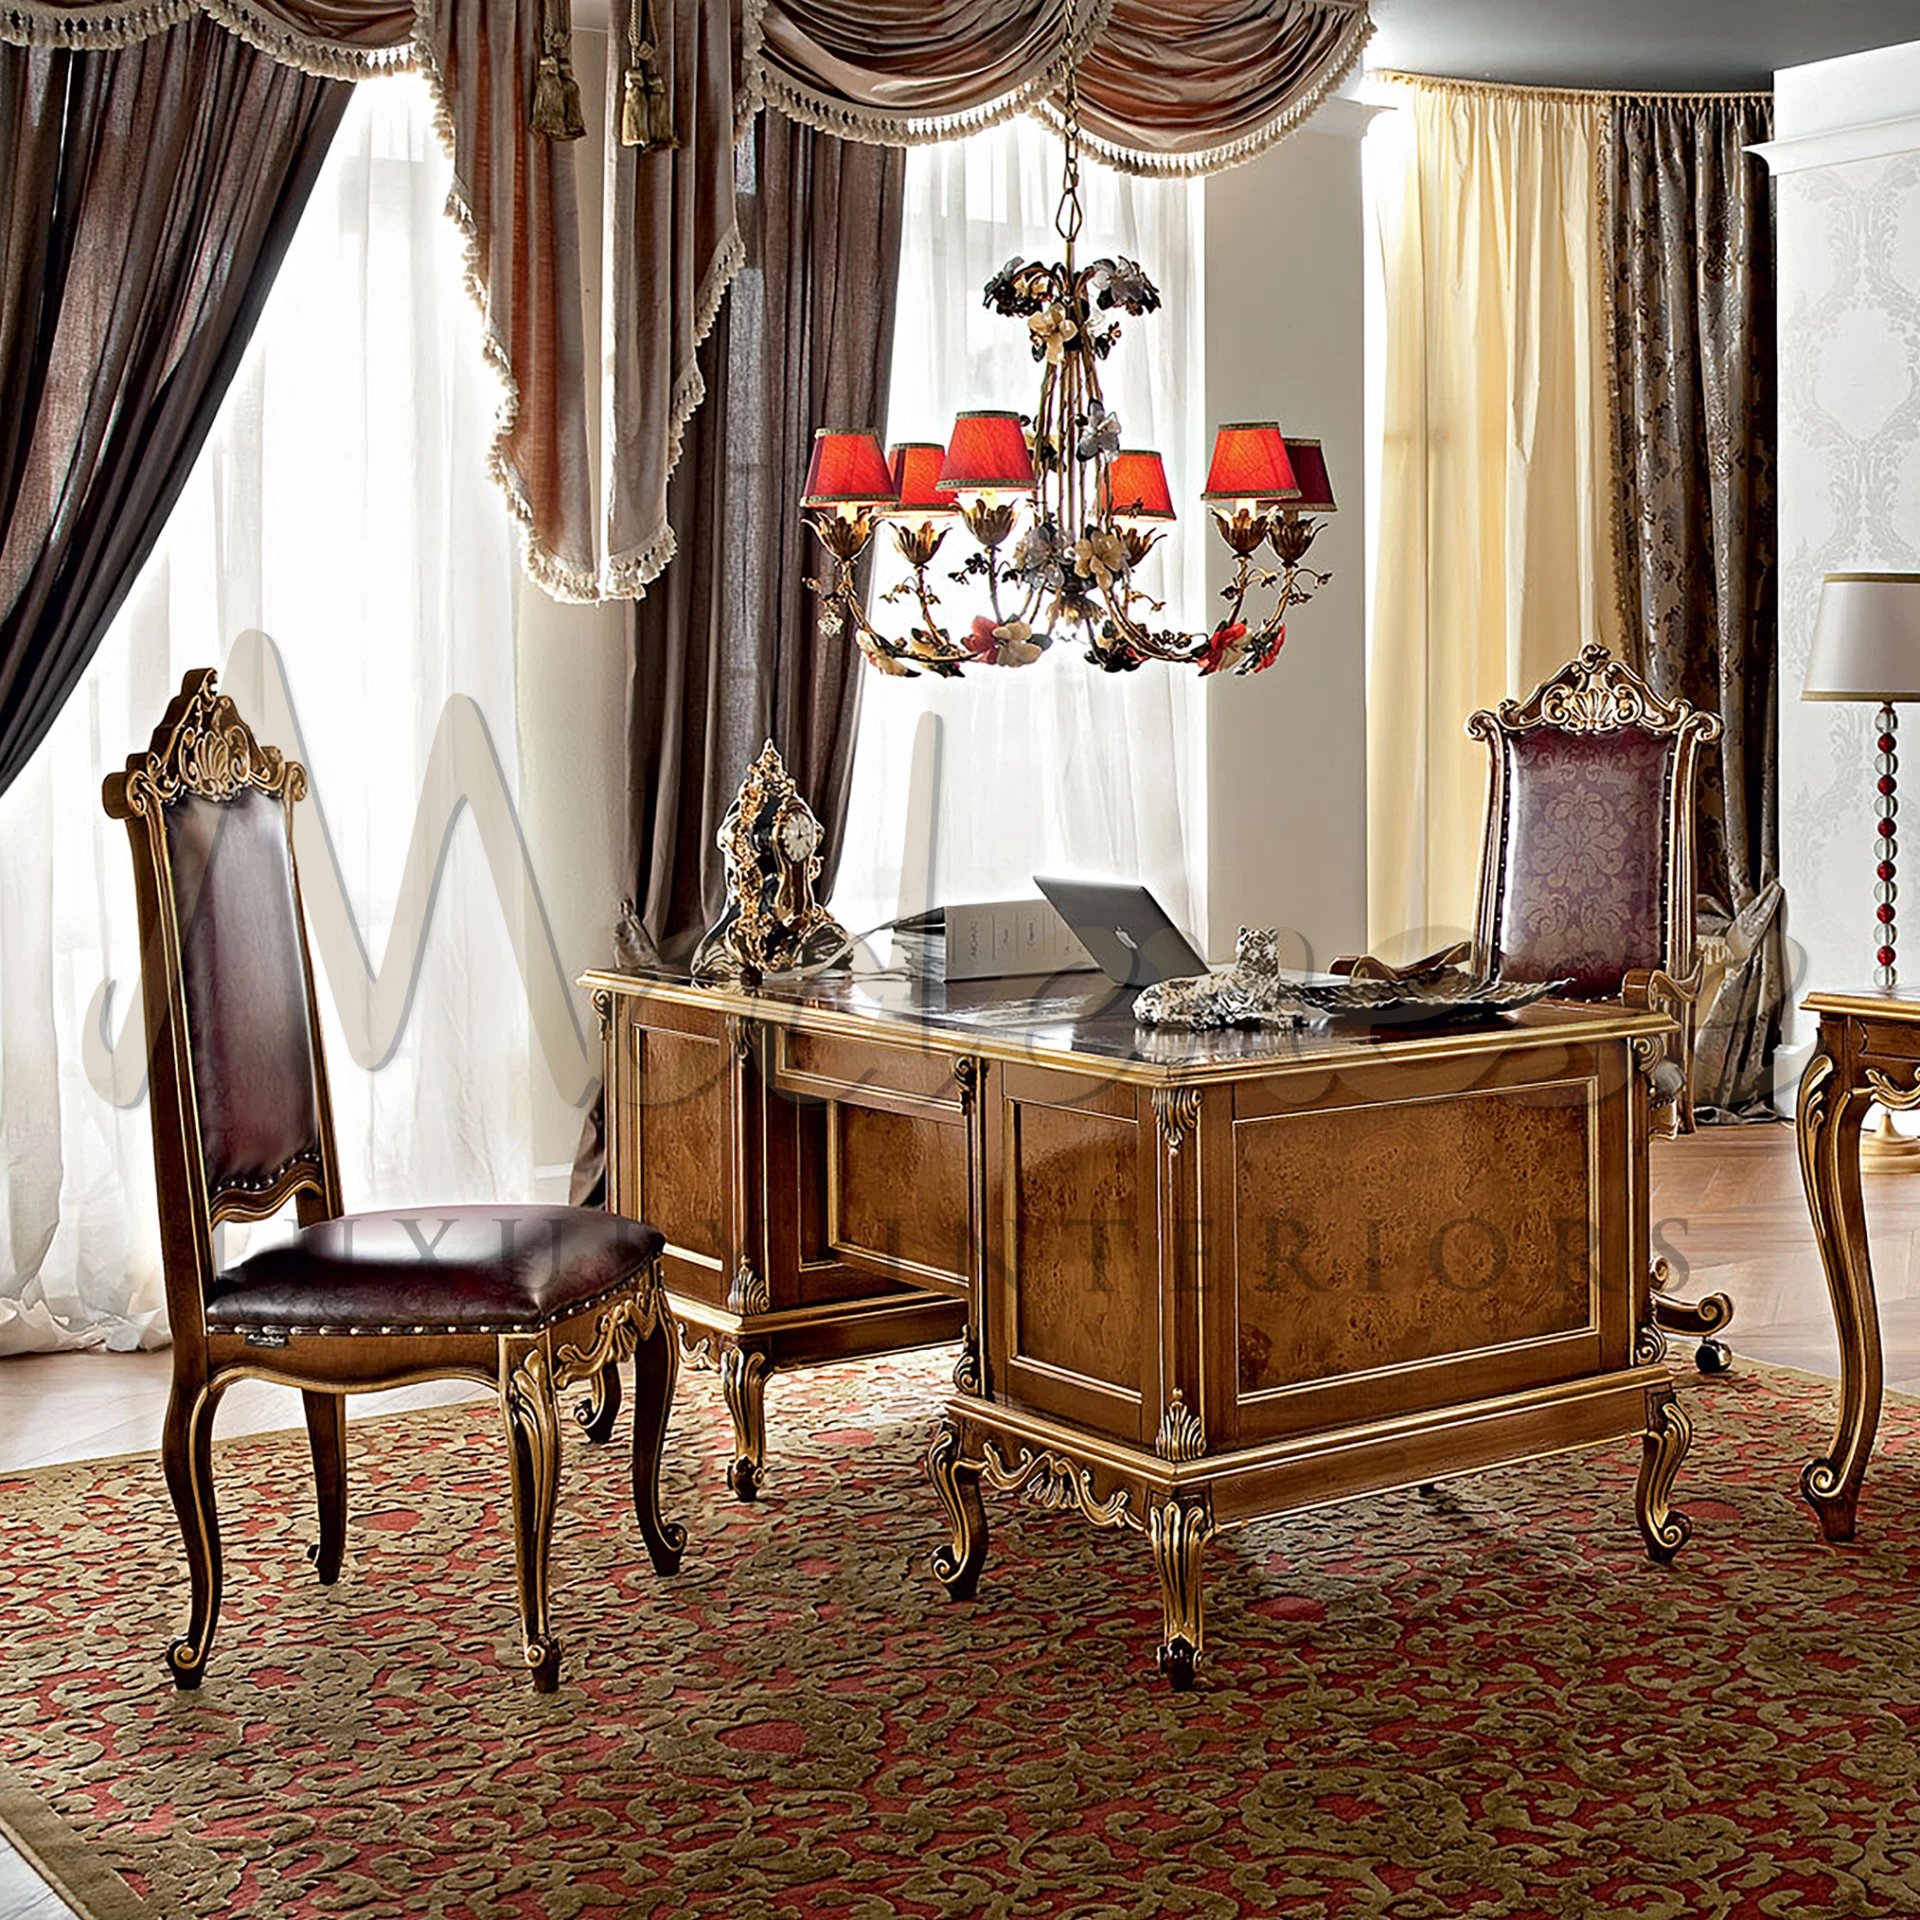 Experience luxury with Modenese Furniture's stunning interior. Walnut frame, gold leaf accents, and exquisite floral upholstery for regal interior